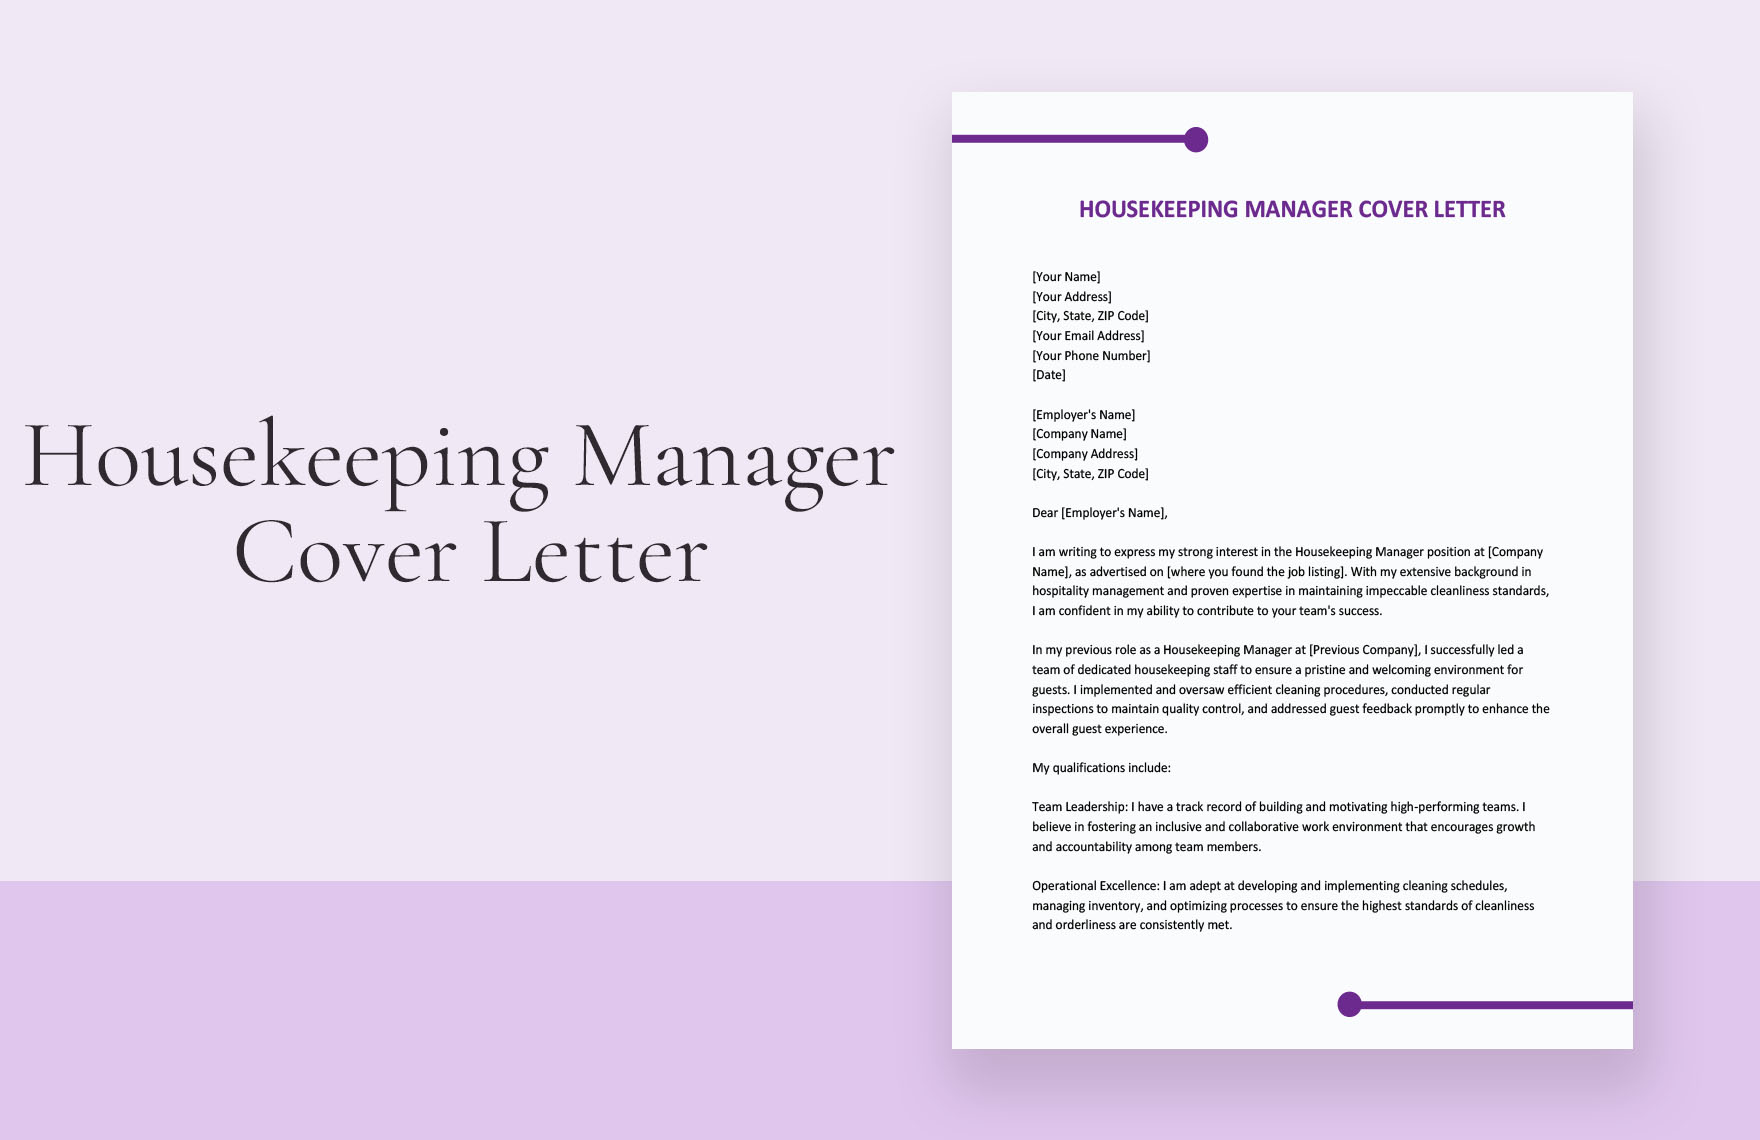 Housekeeping Manager Cover Letter